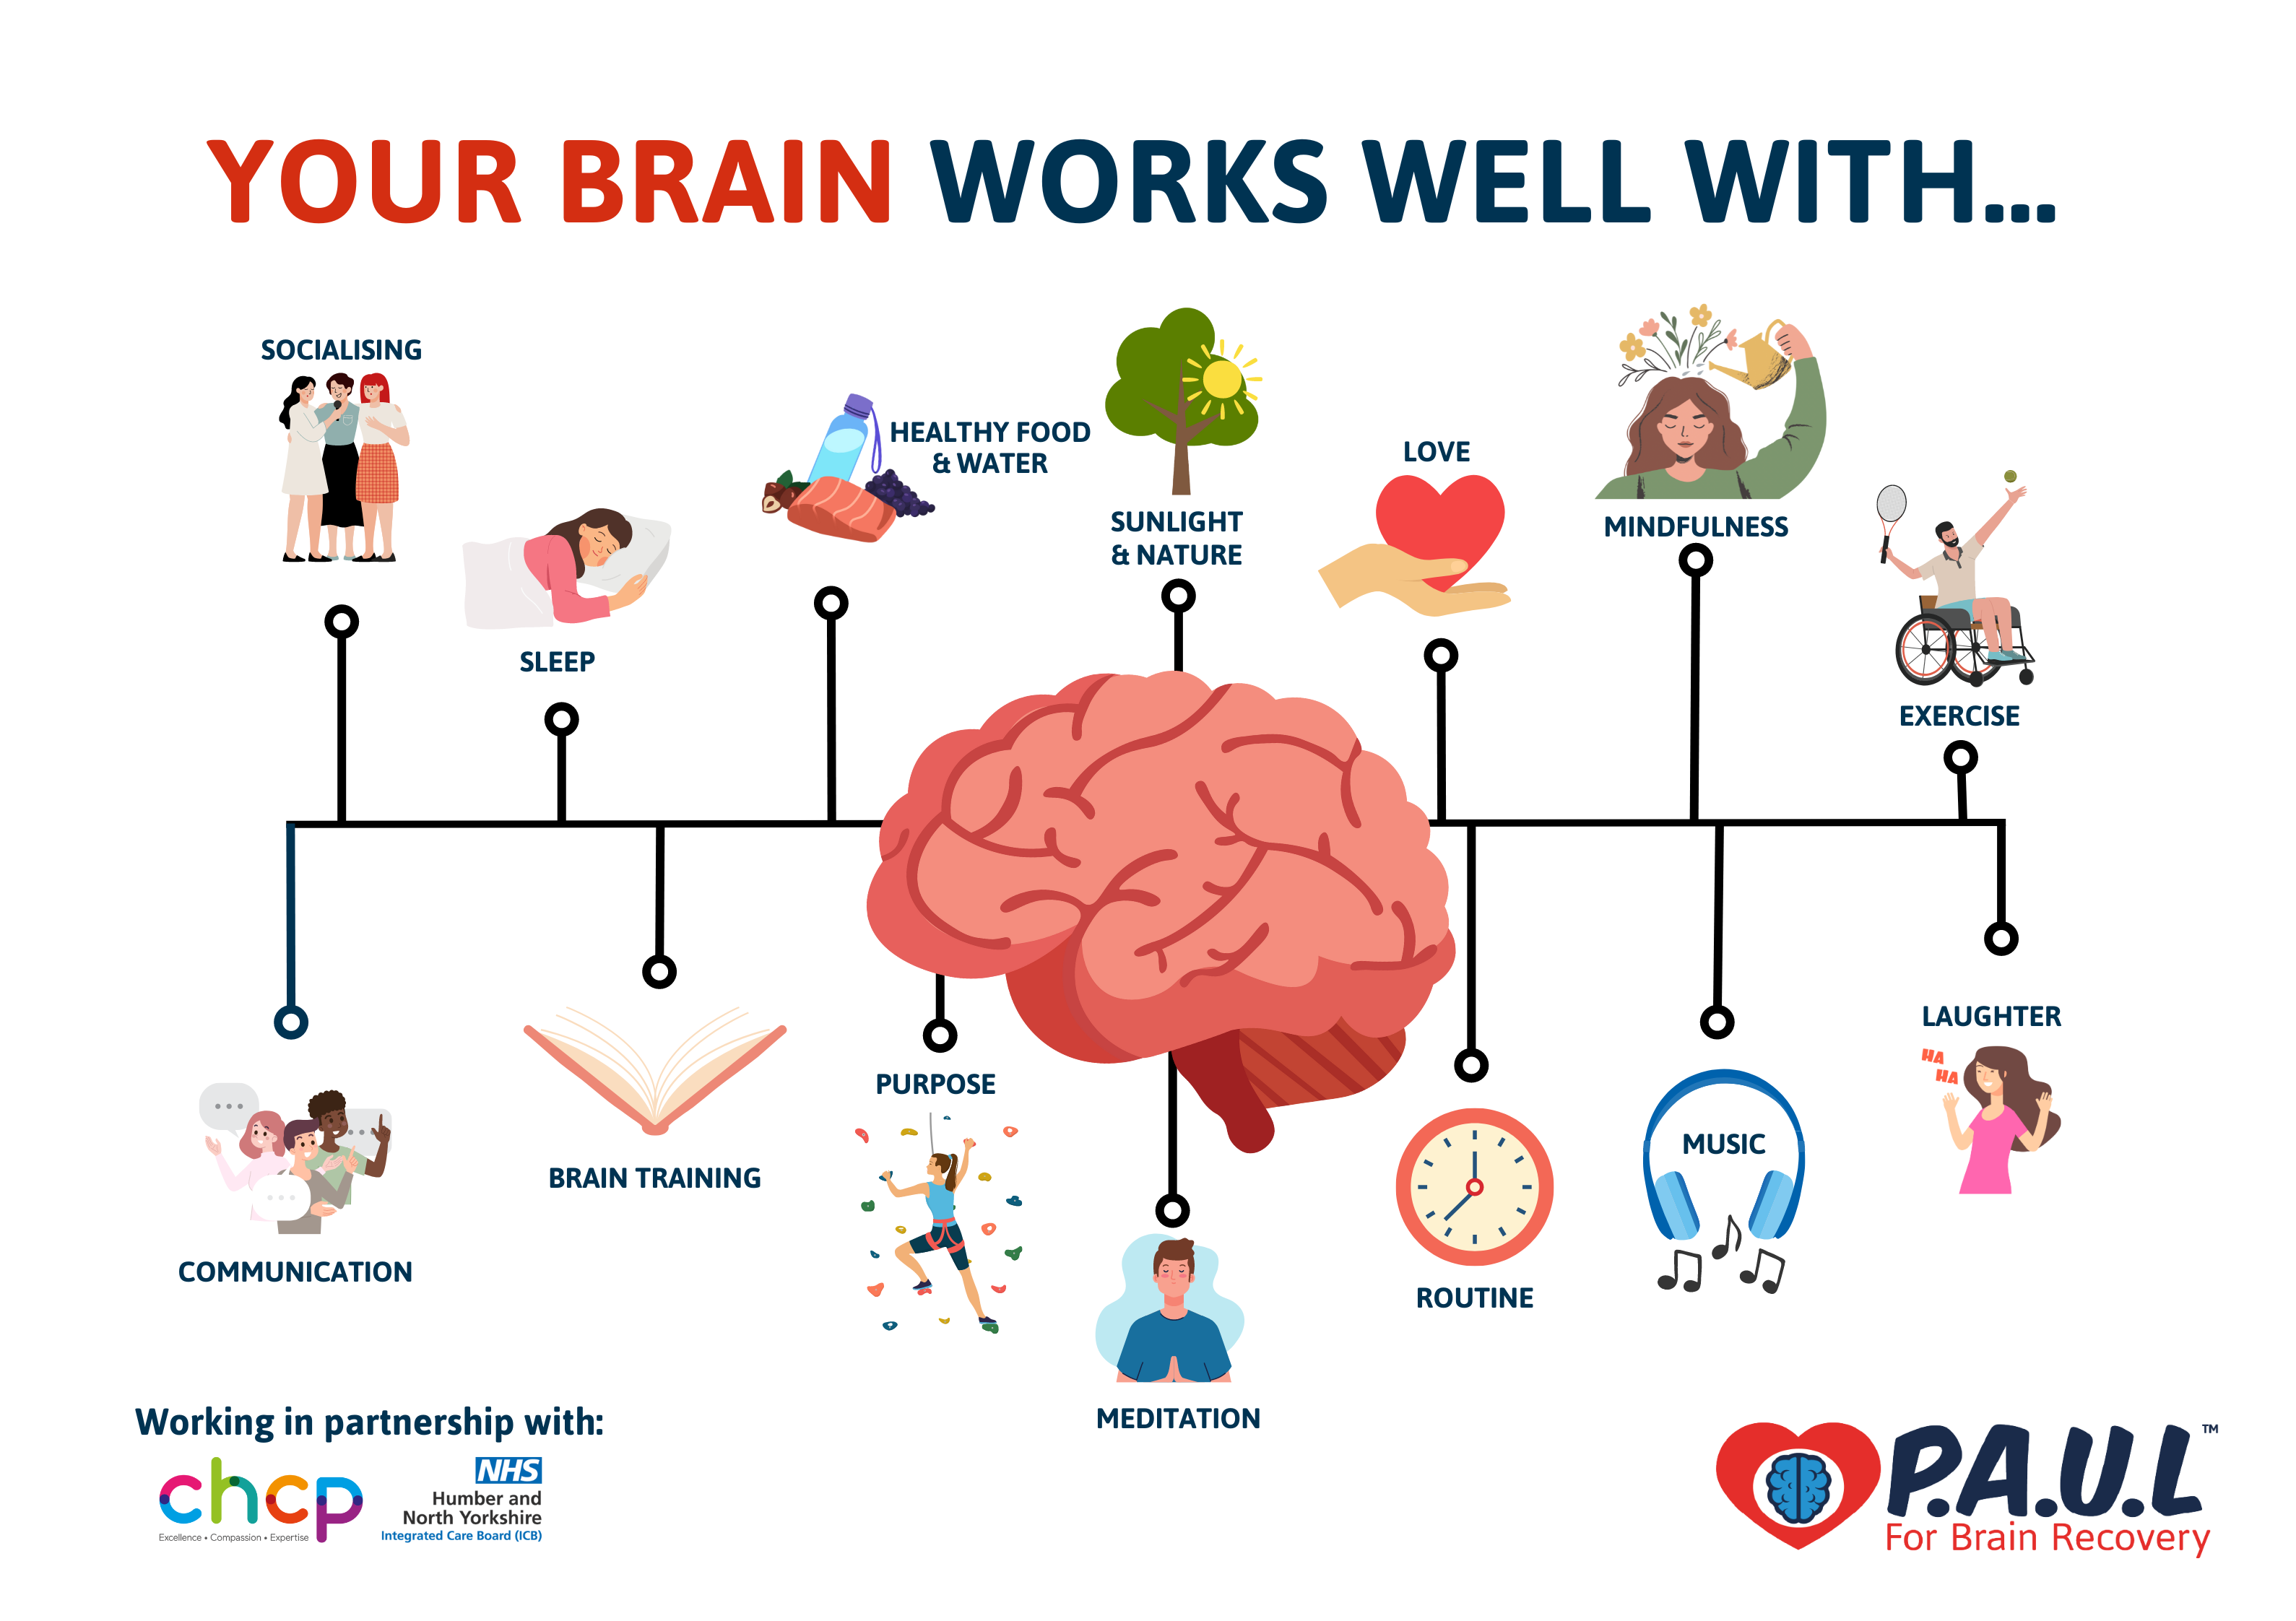 Your Brain Work Well With...<br />
Socialising<br />
Communication<br />
Sleep<br />
Brain Training<br />
Healthy food and water<br />
Purpose<br />
Sunlight and nature<br />
Medication<br />
Love<br />
Routine<br />
Mindfulness<br />
Music<br />
Exercise<br />
Laughter<br />
